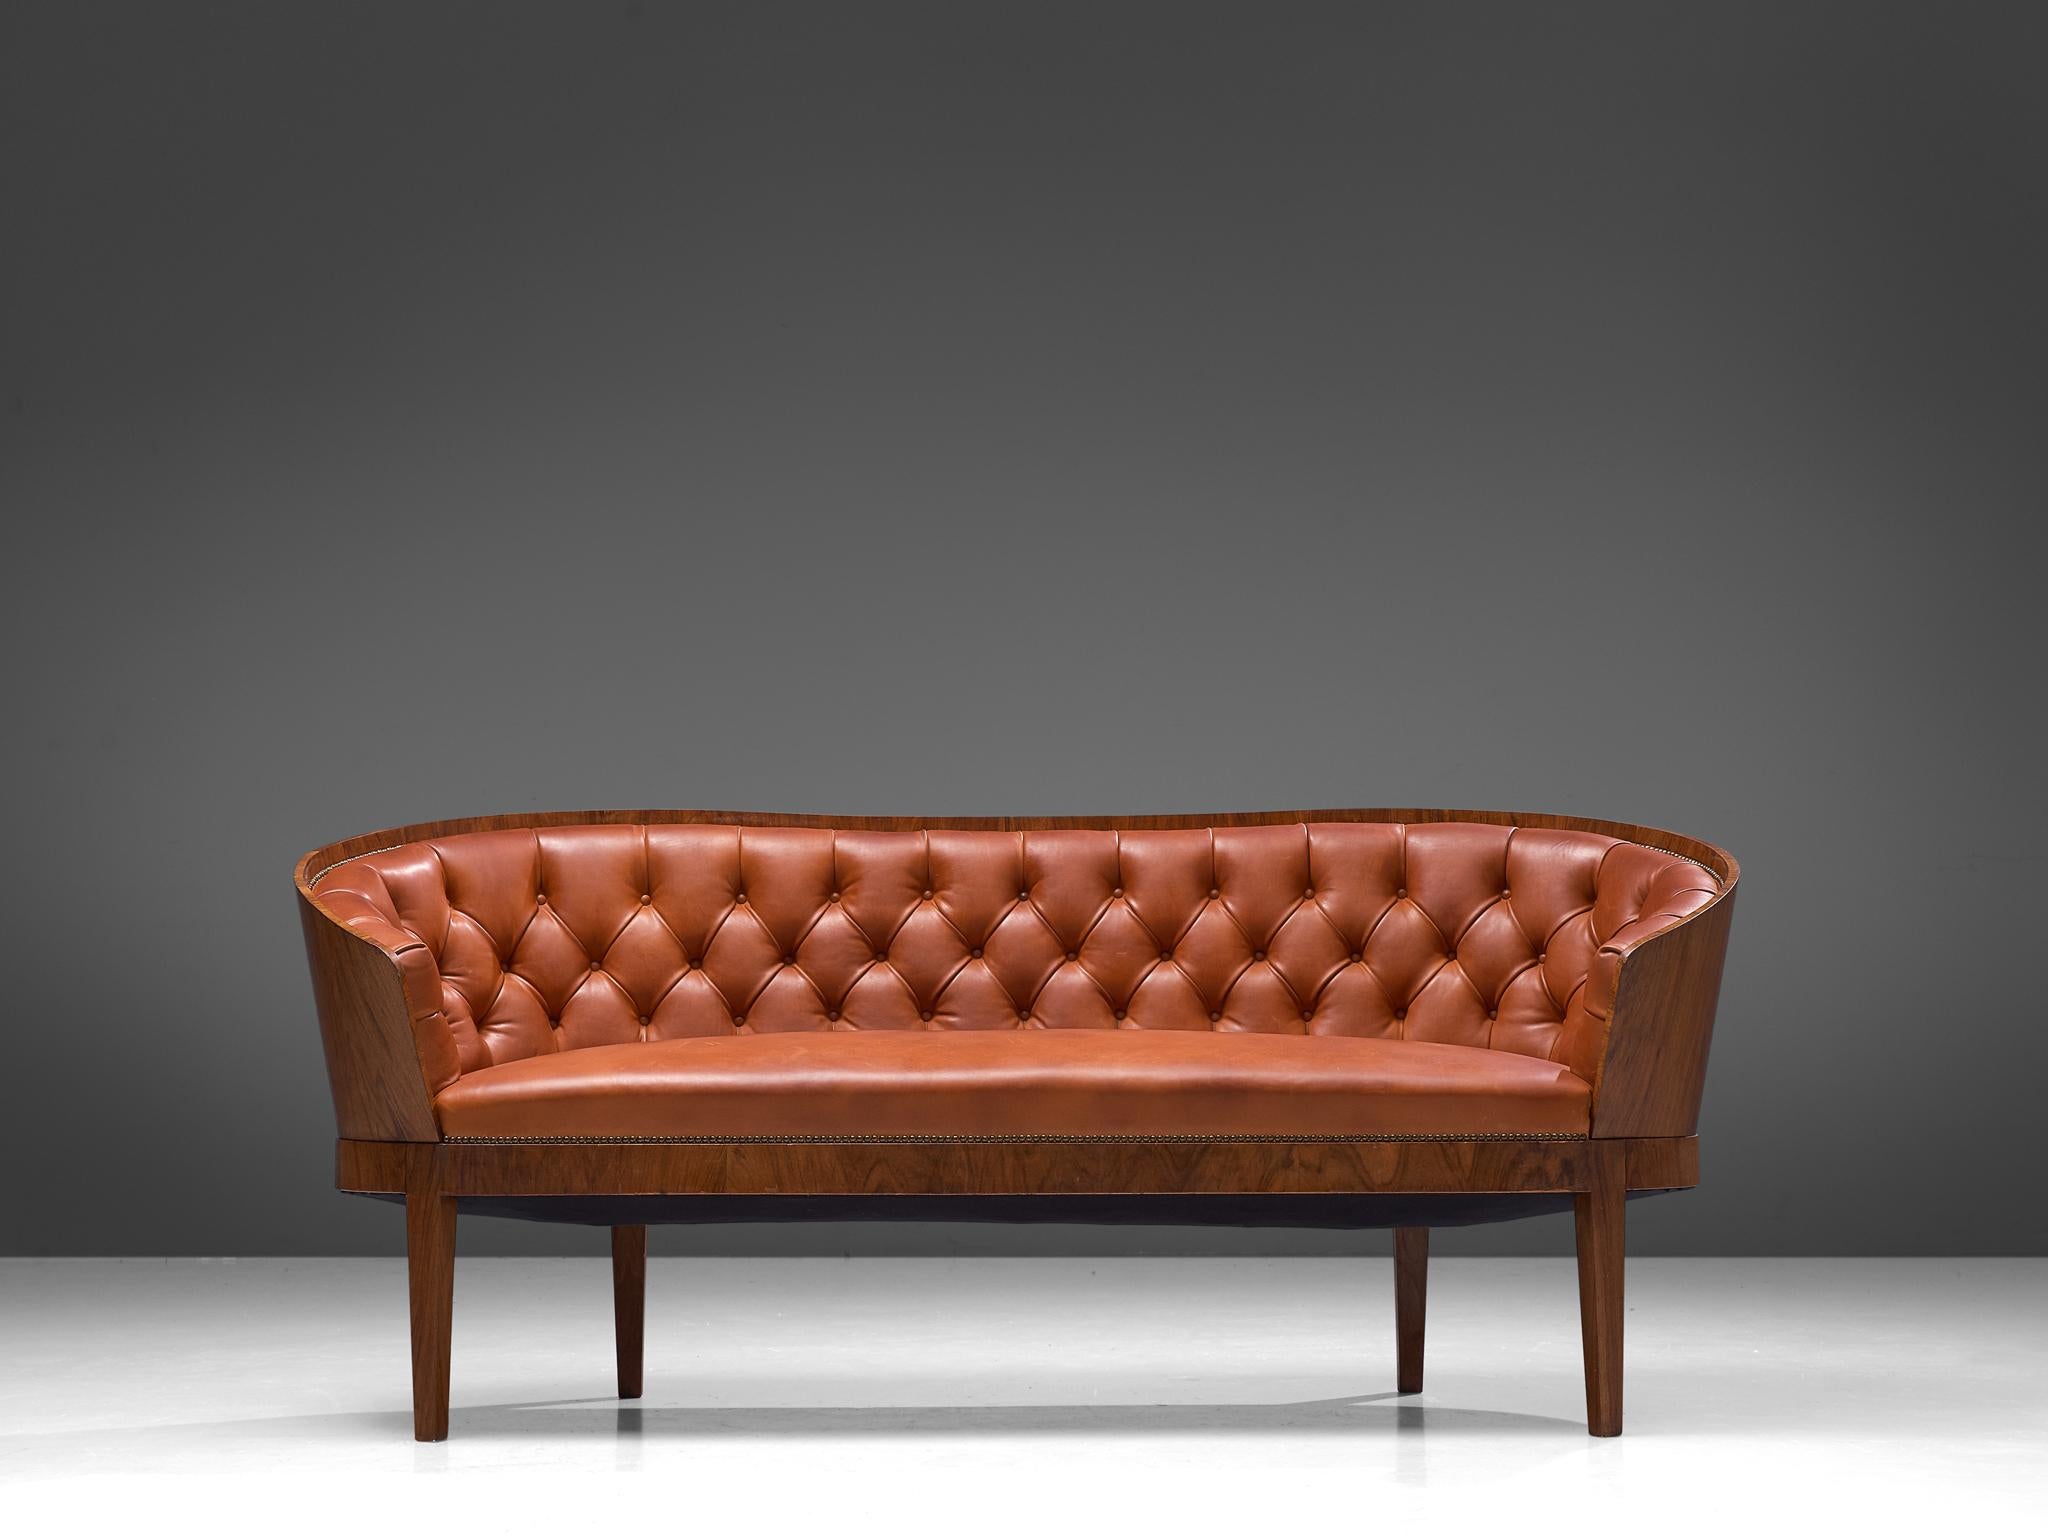 Sofa, walnut and leather, Denmark, 1920s

A beautiful Danish sofa executed in a walnut frame and upholstered in warm cognac colored leather. The voluptuous upholstered backrest is deep-buttoned tufted and finished with nails. The frame of the back